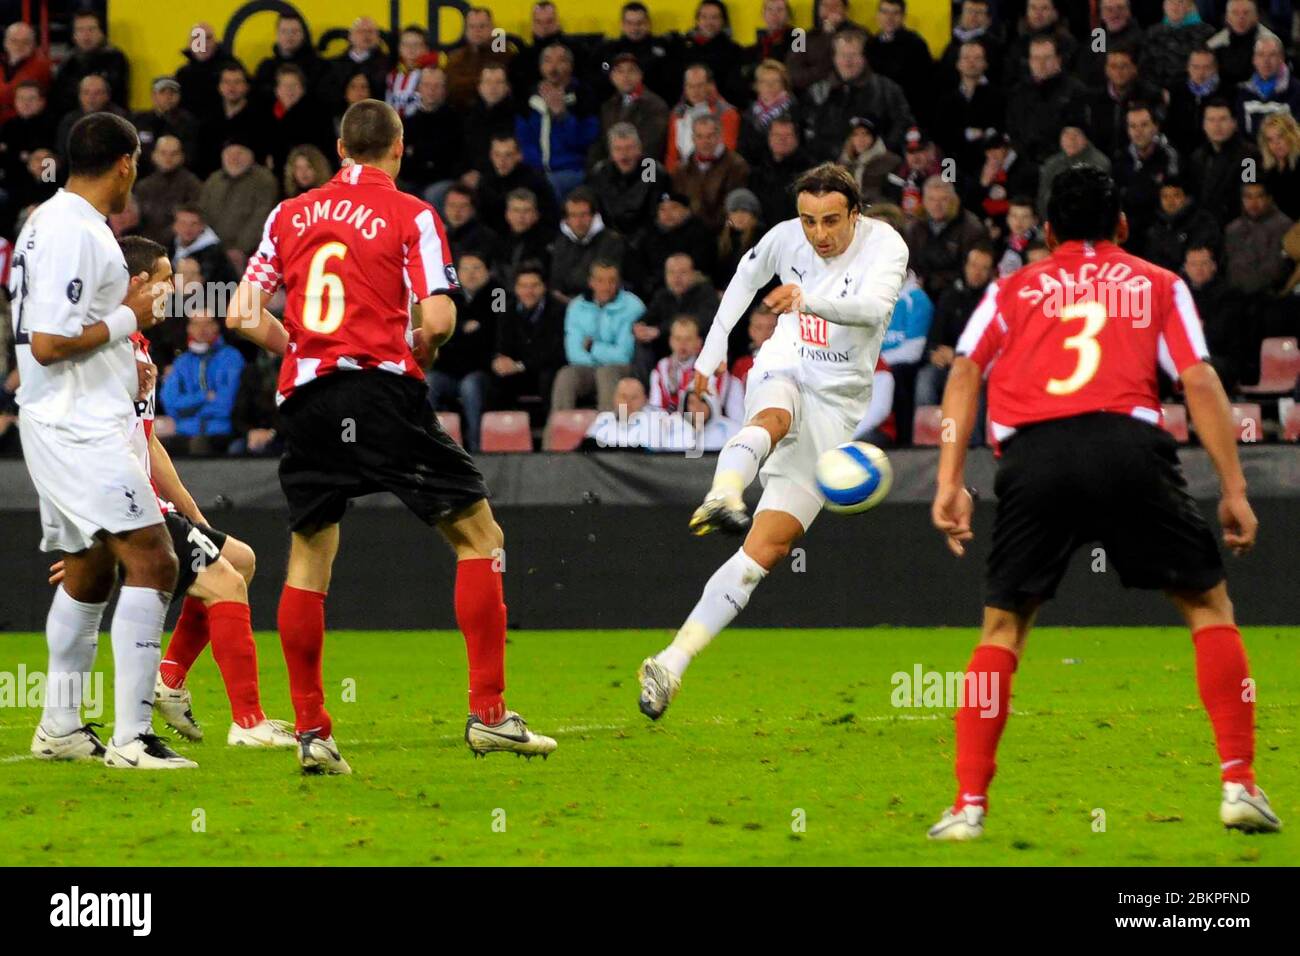 EINDHOVEN, NEDERLAND. MARCH 12: Dimitar Berbatov (Spurs) shoots to score the first goal During UEFA Cup Round of 16 Second Leg between PSV Eindhoven a Stock Photo